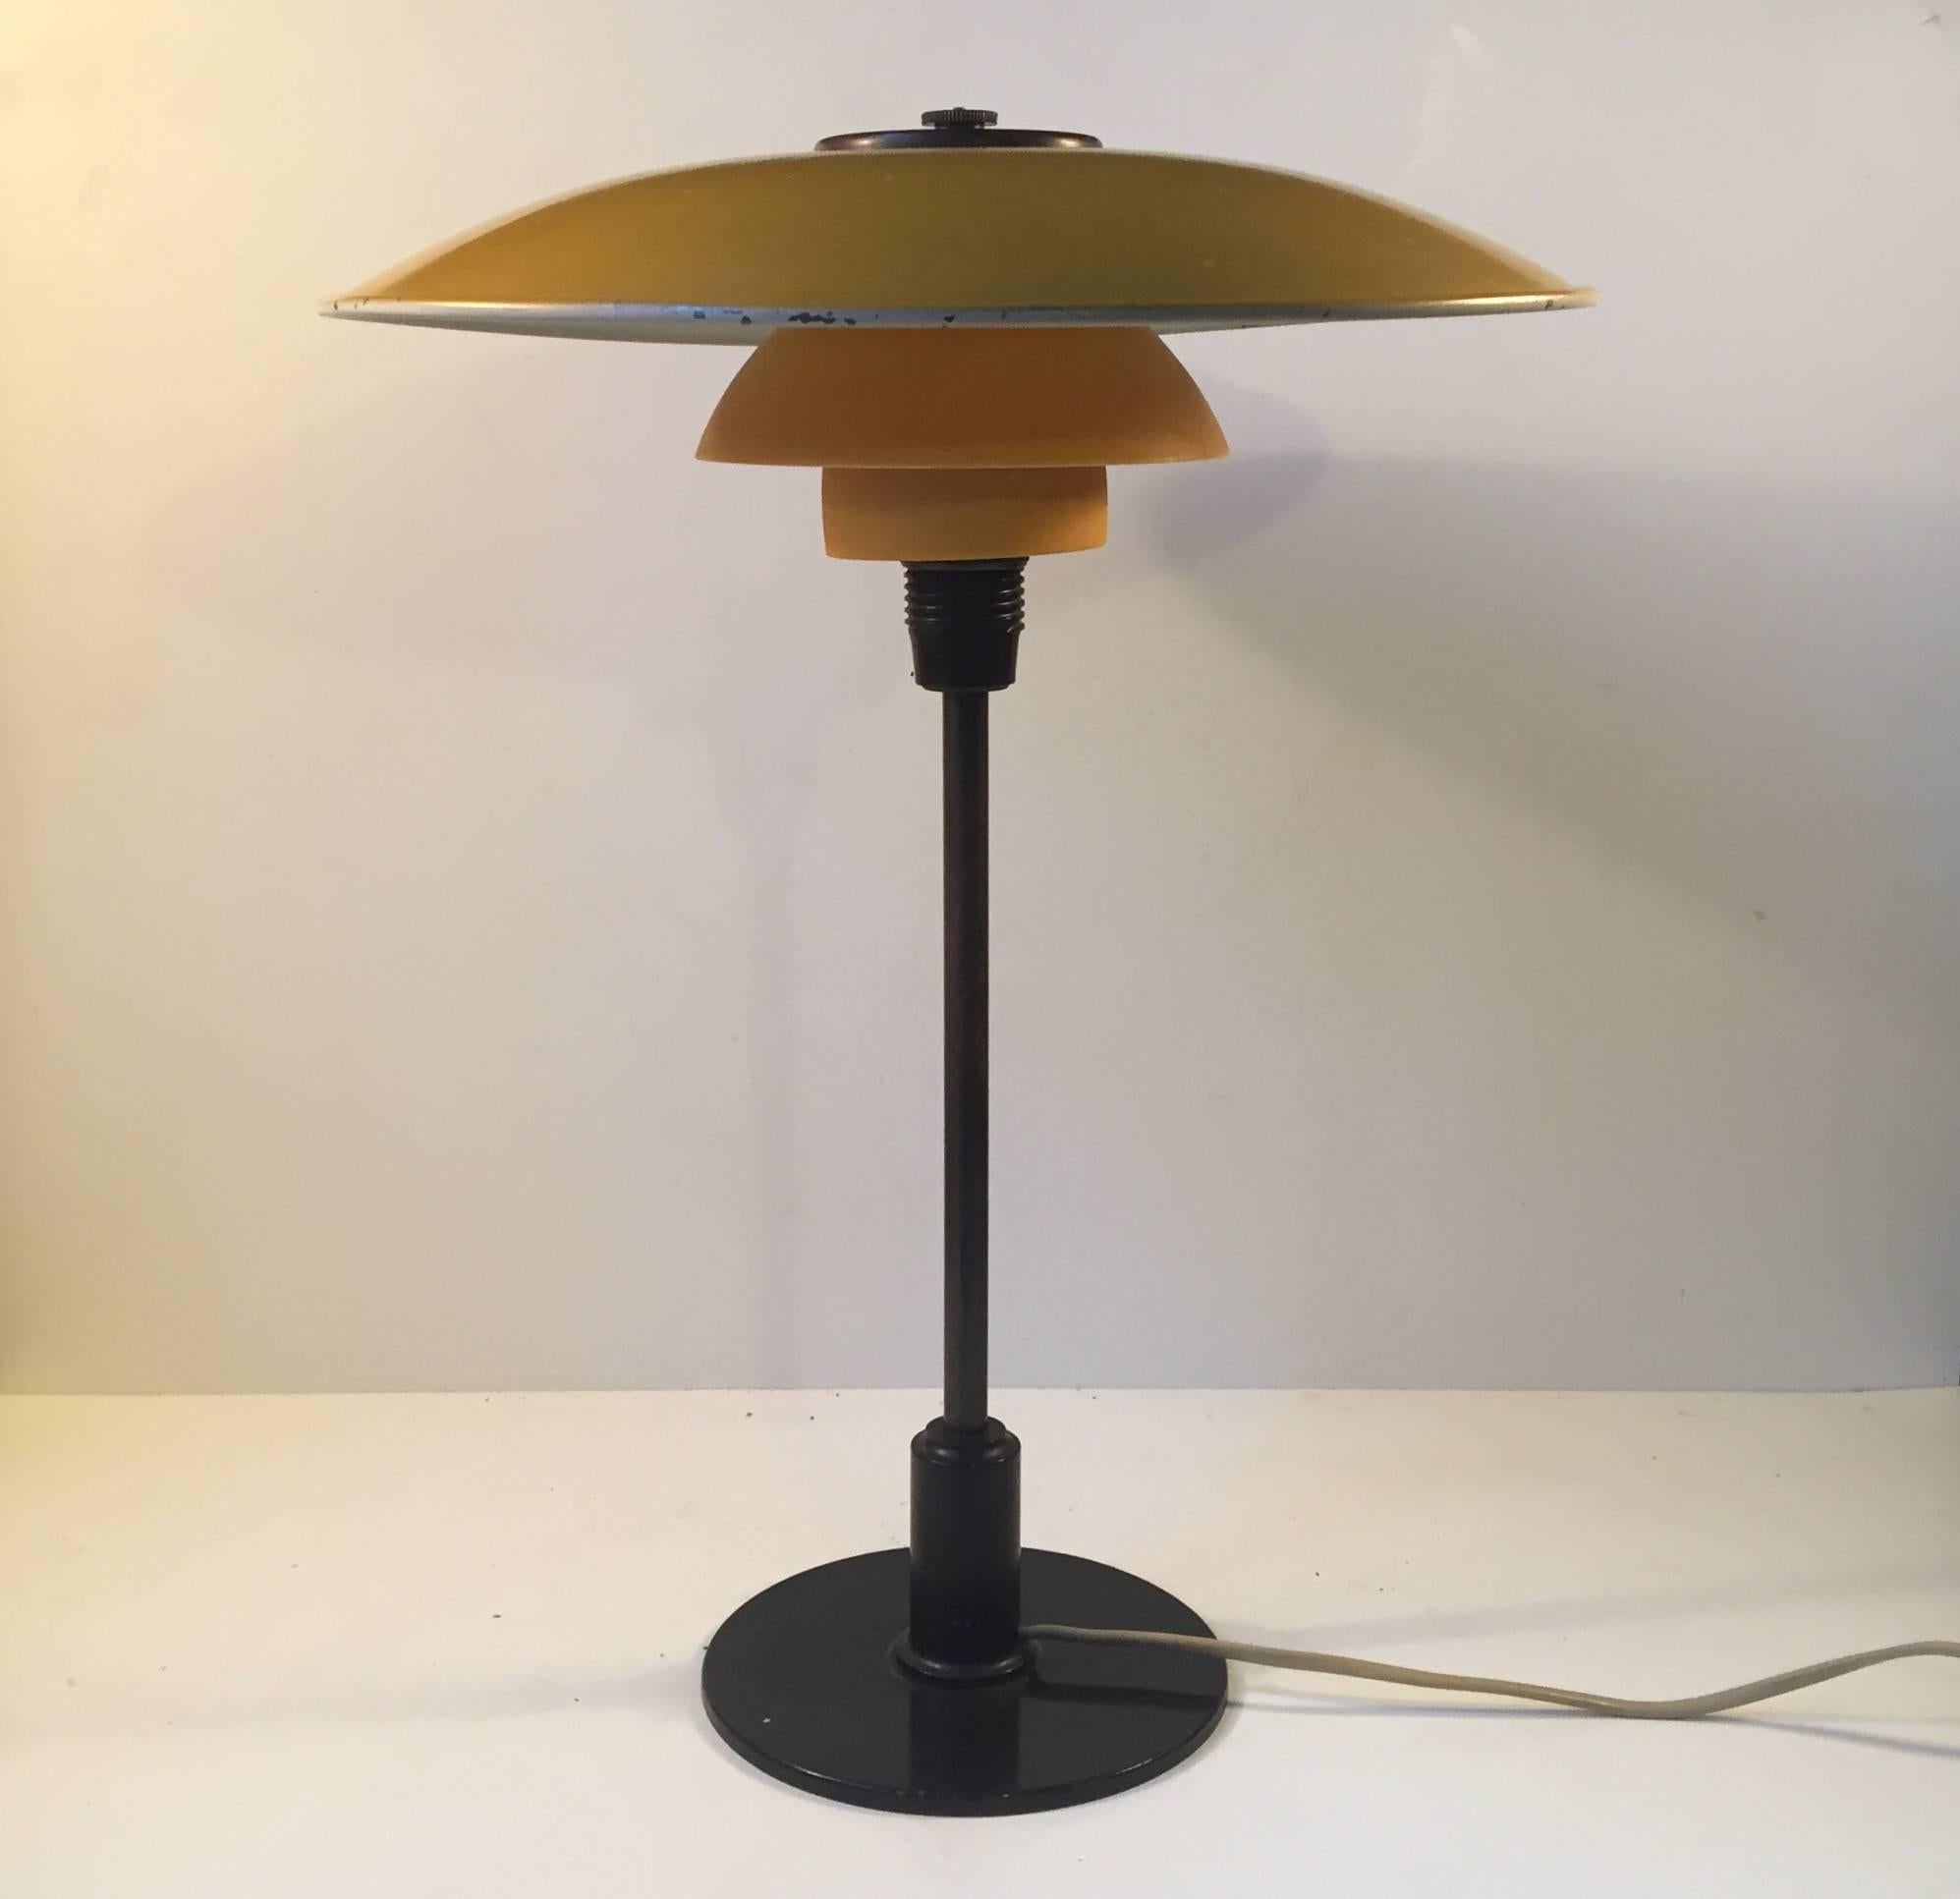 PH 3½-2 desk light by Poul Henningsen. Original yellow lacquered zinc top-shade, matté yellow single layered glass middle and bottom shade, patinated brass stem and Bakelite detailing. Manufactured by Louis Poulsen in Denmark circa 1930. Fine